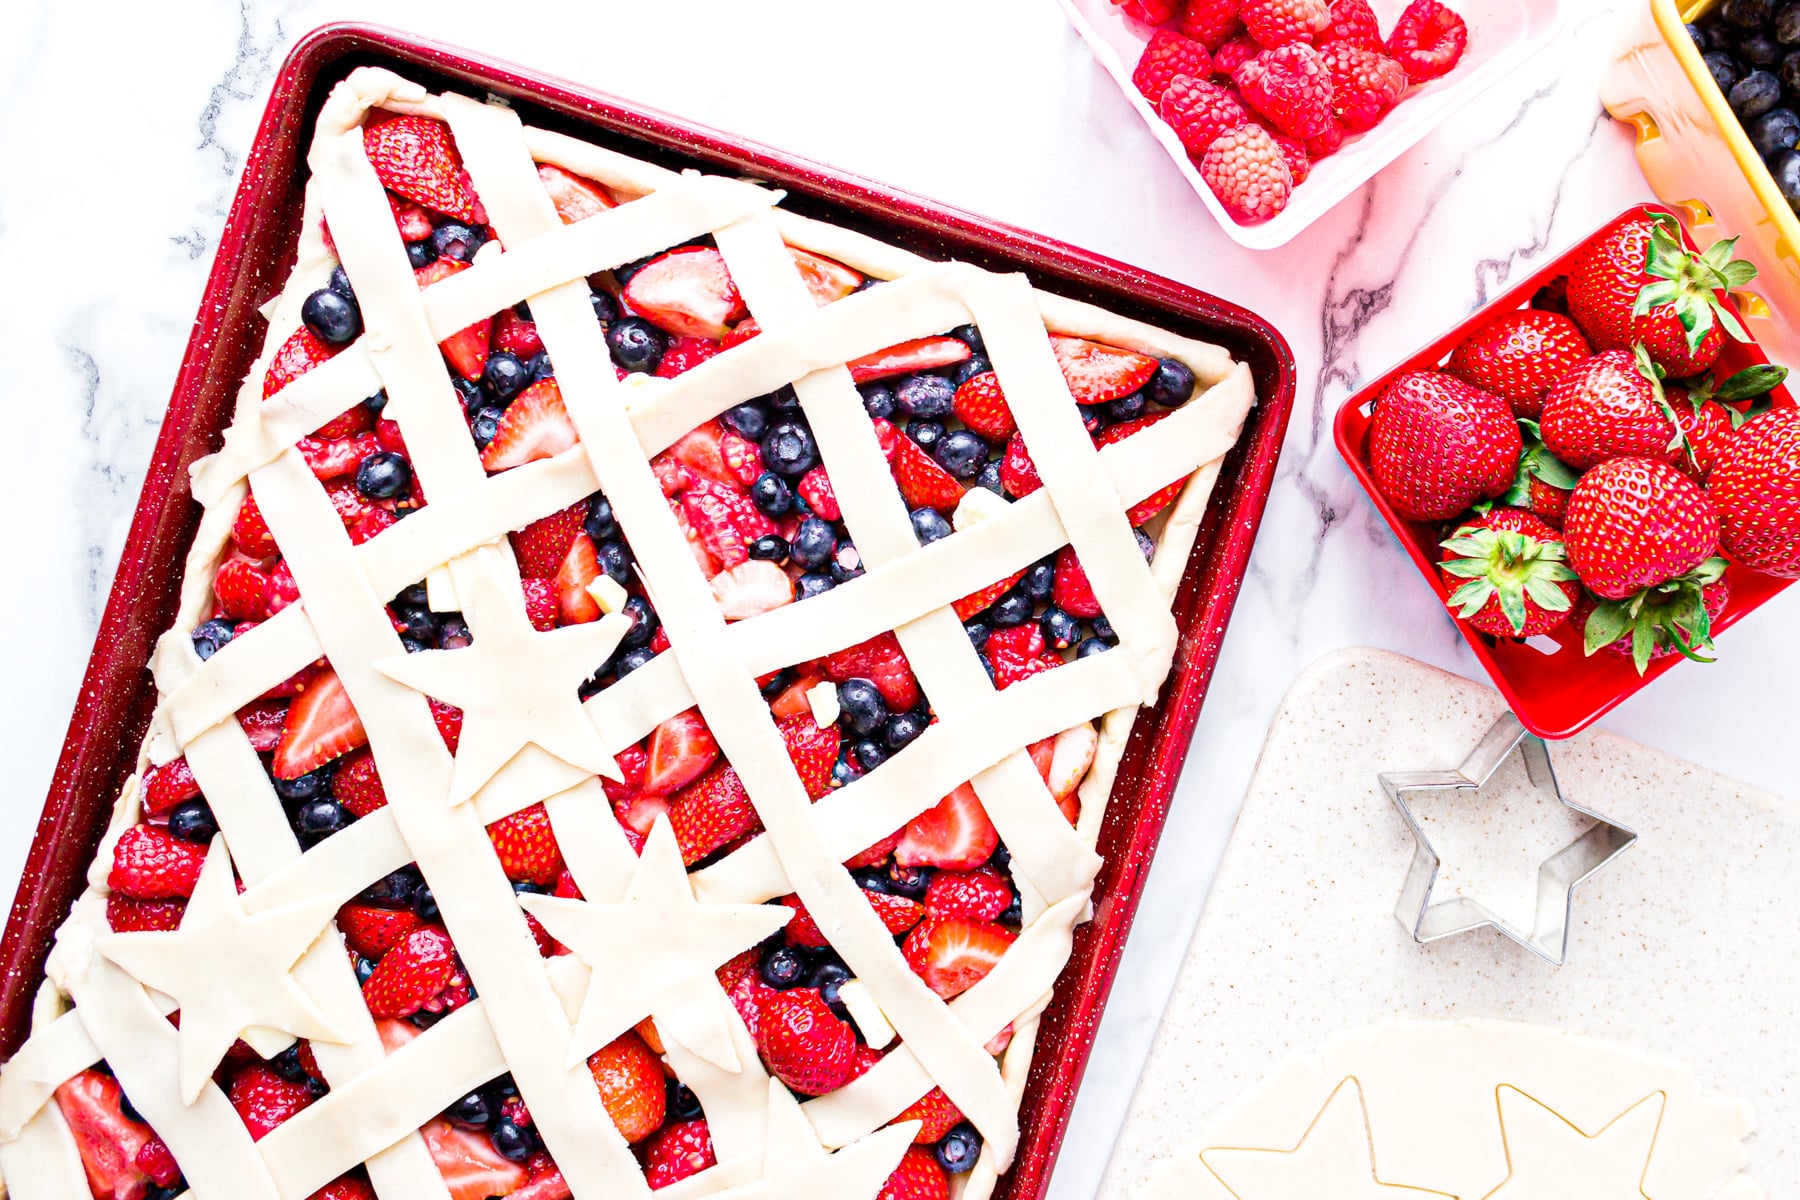 pie filled with berries and lattice top.